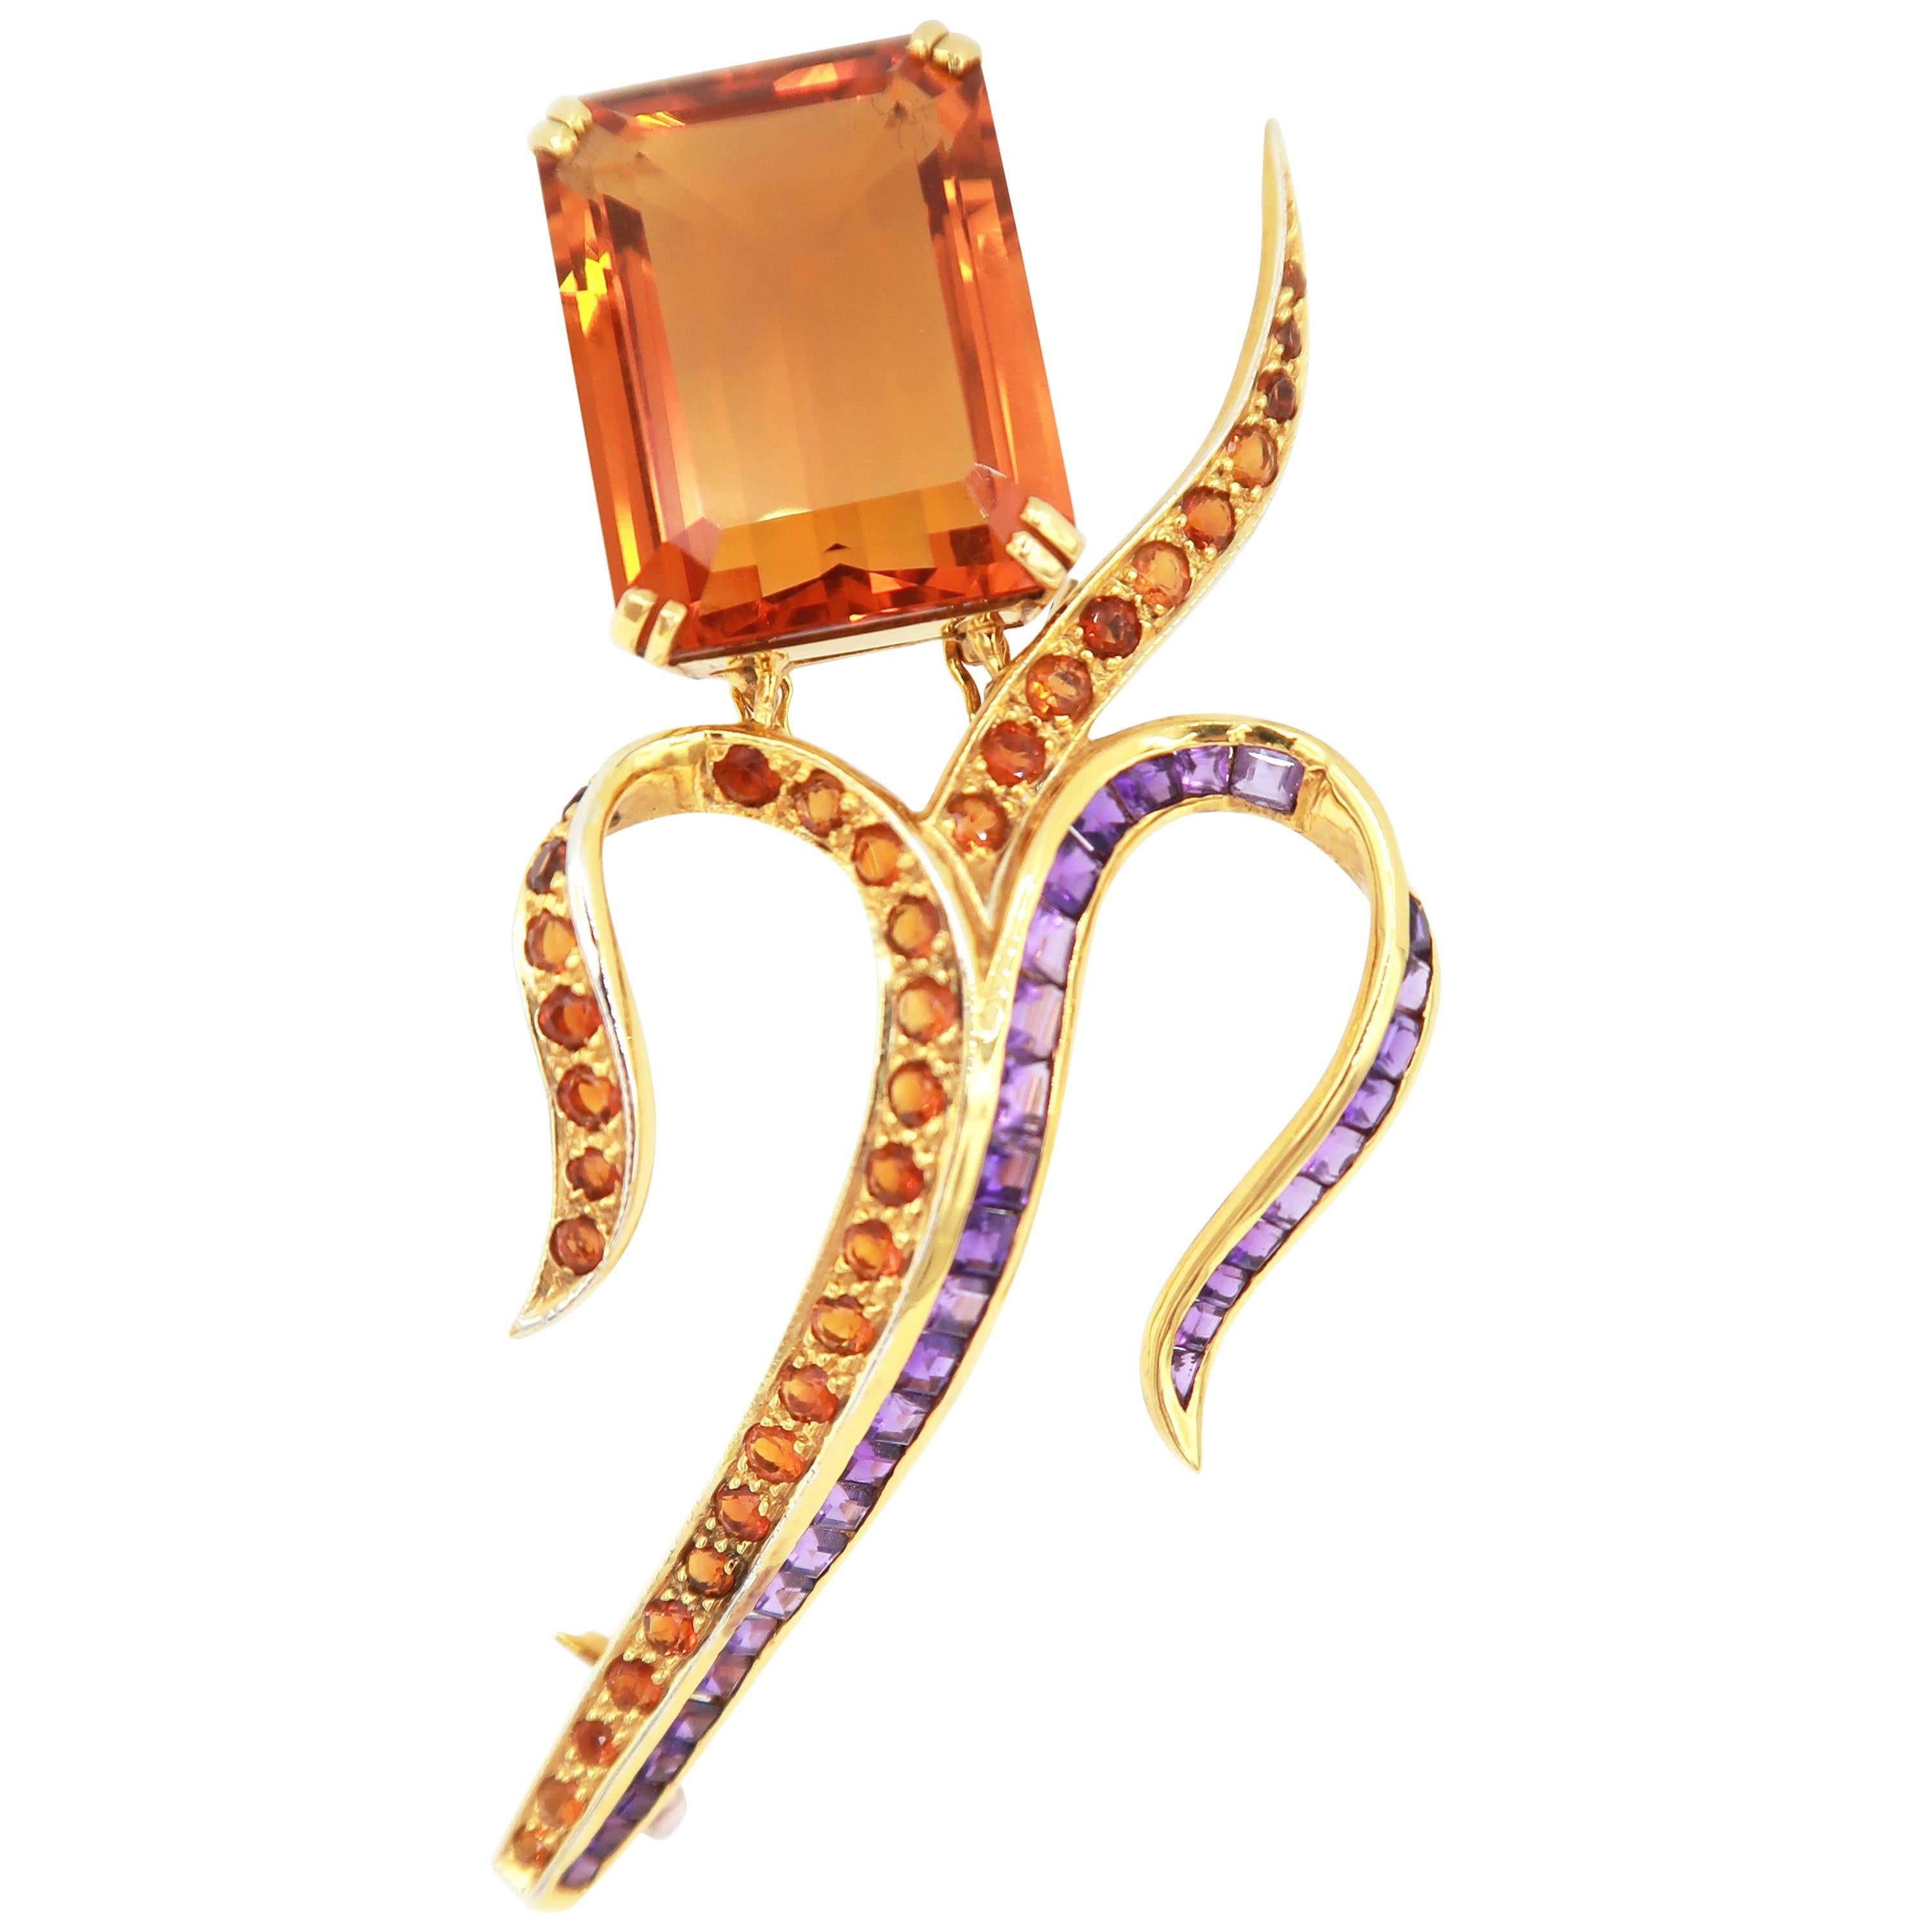 Important 14.18 Carat Amethyst 18.11 Carat Citrine Interchangeable Gold Brooch For Sale